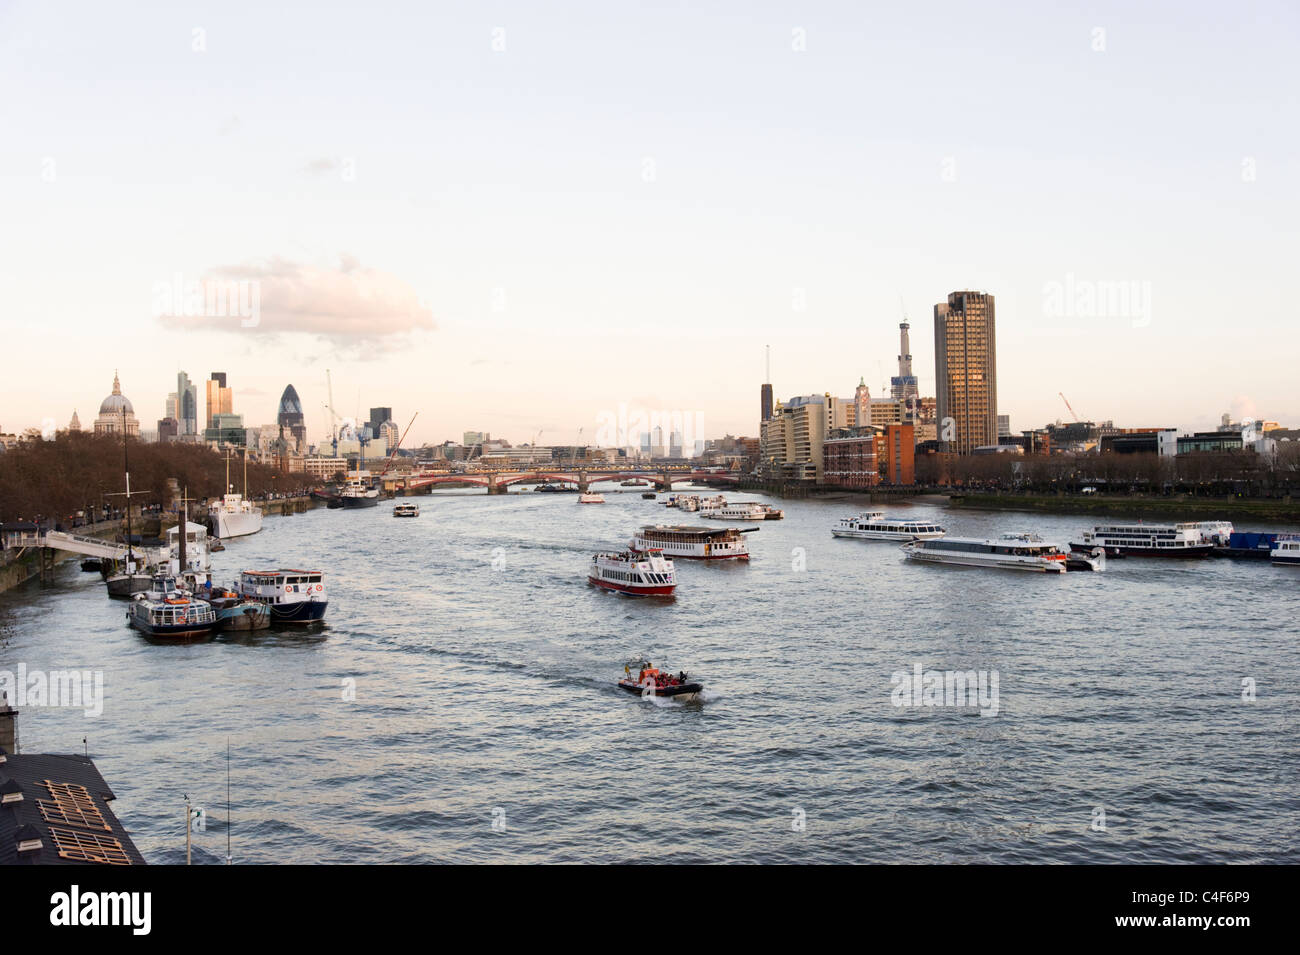 Boats on the river Thames, London, England, UK Stock Photo